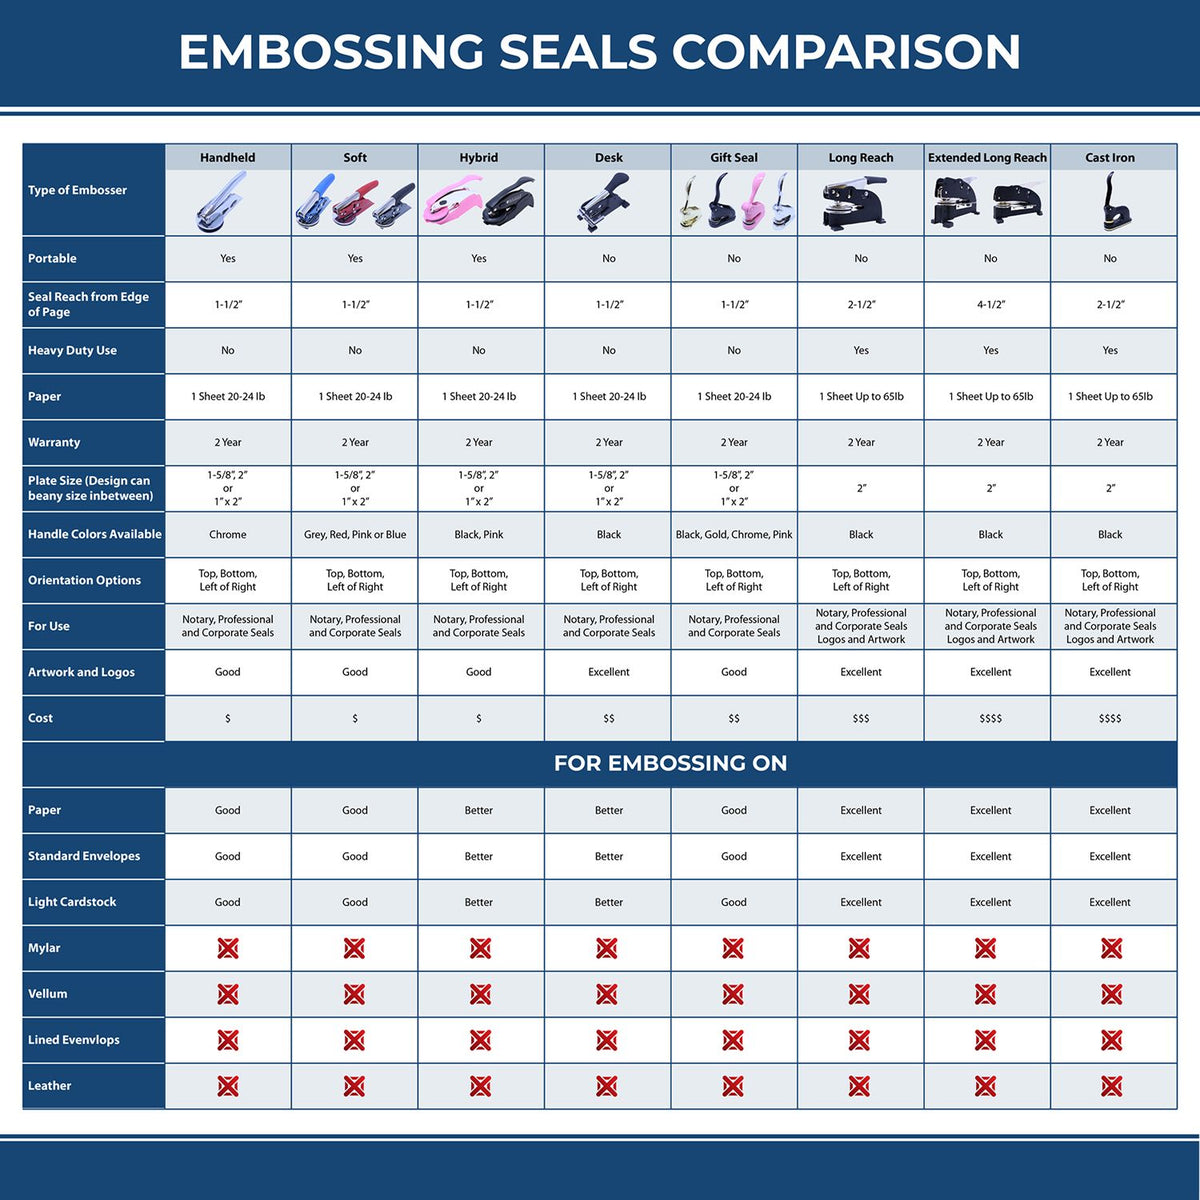 A comparison chart for the different types of mount models available for the New Hampshire Engineer Desk Seal.